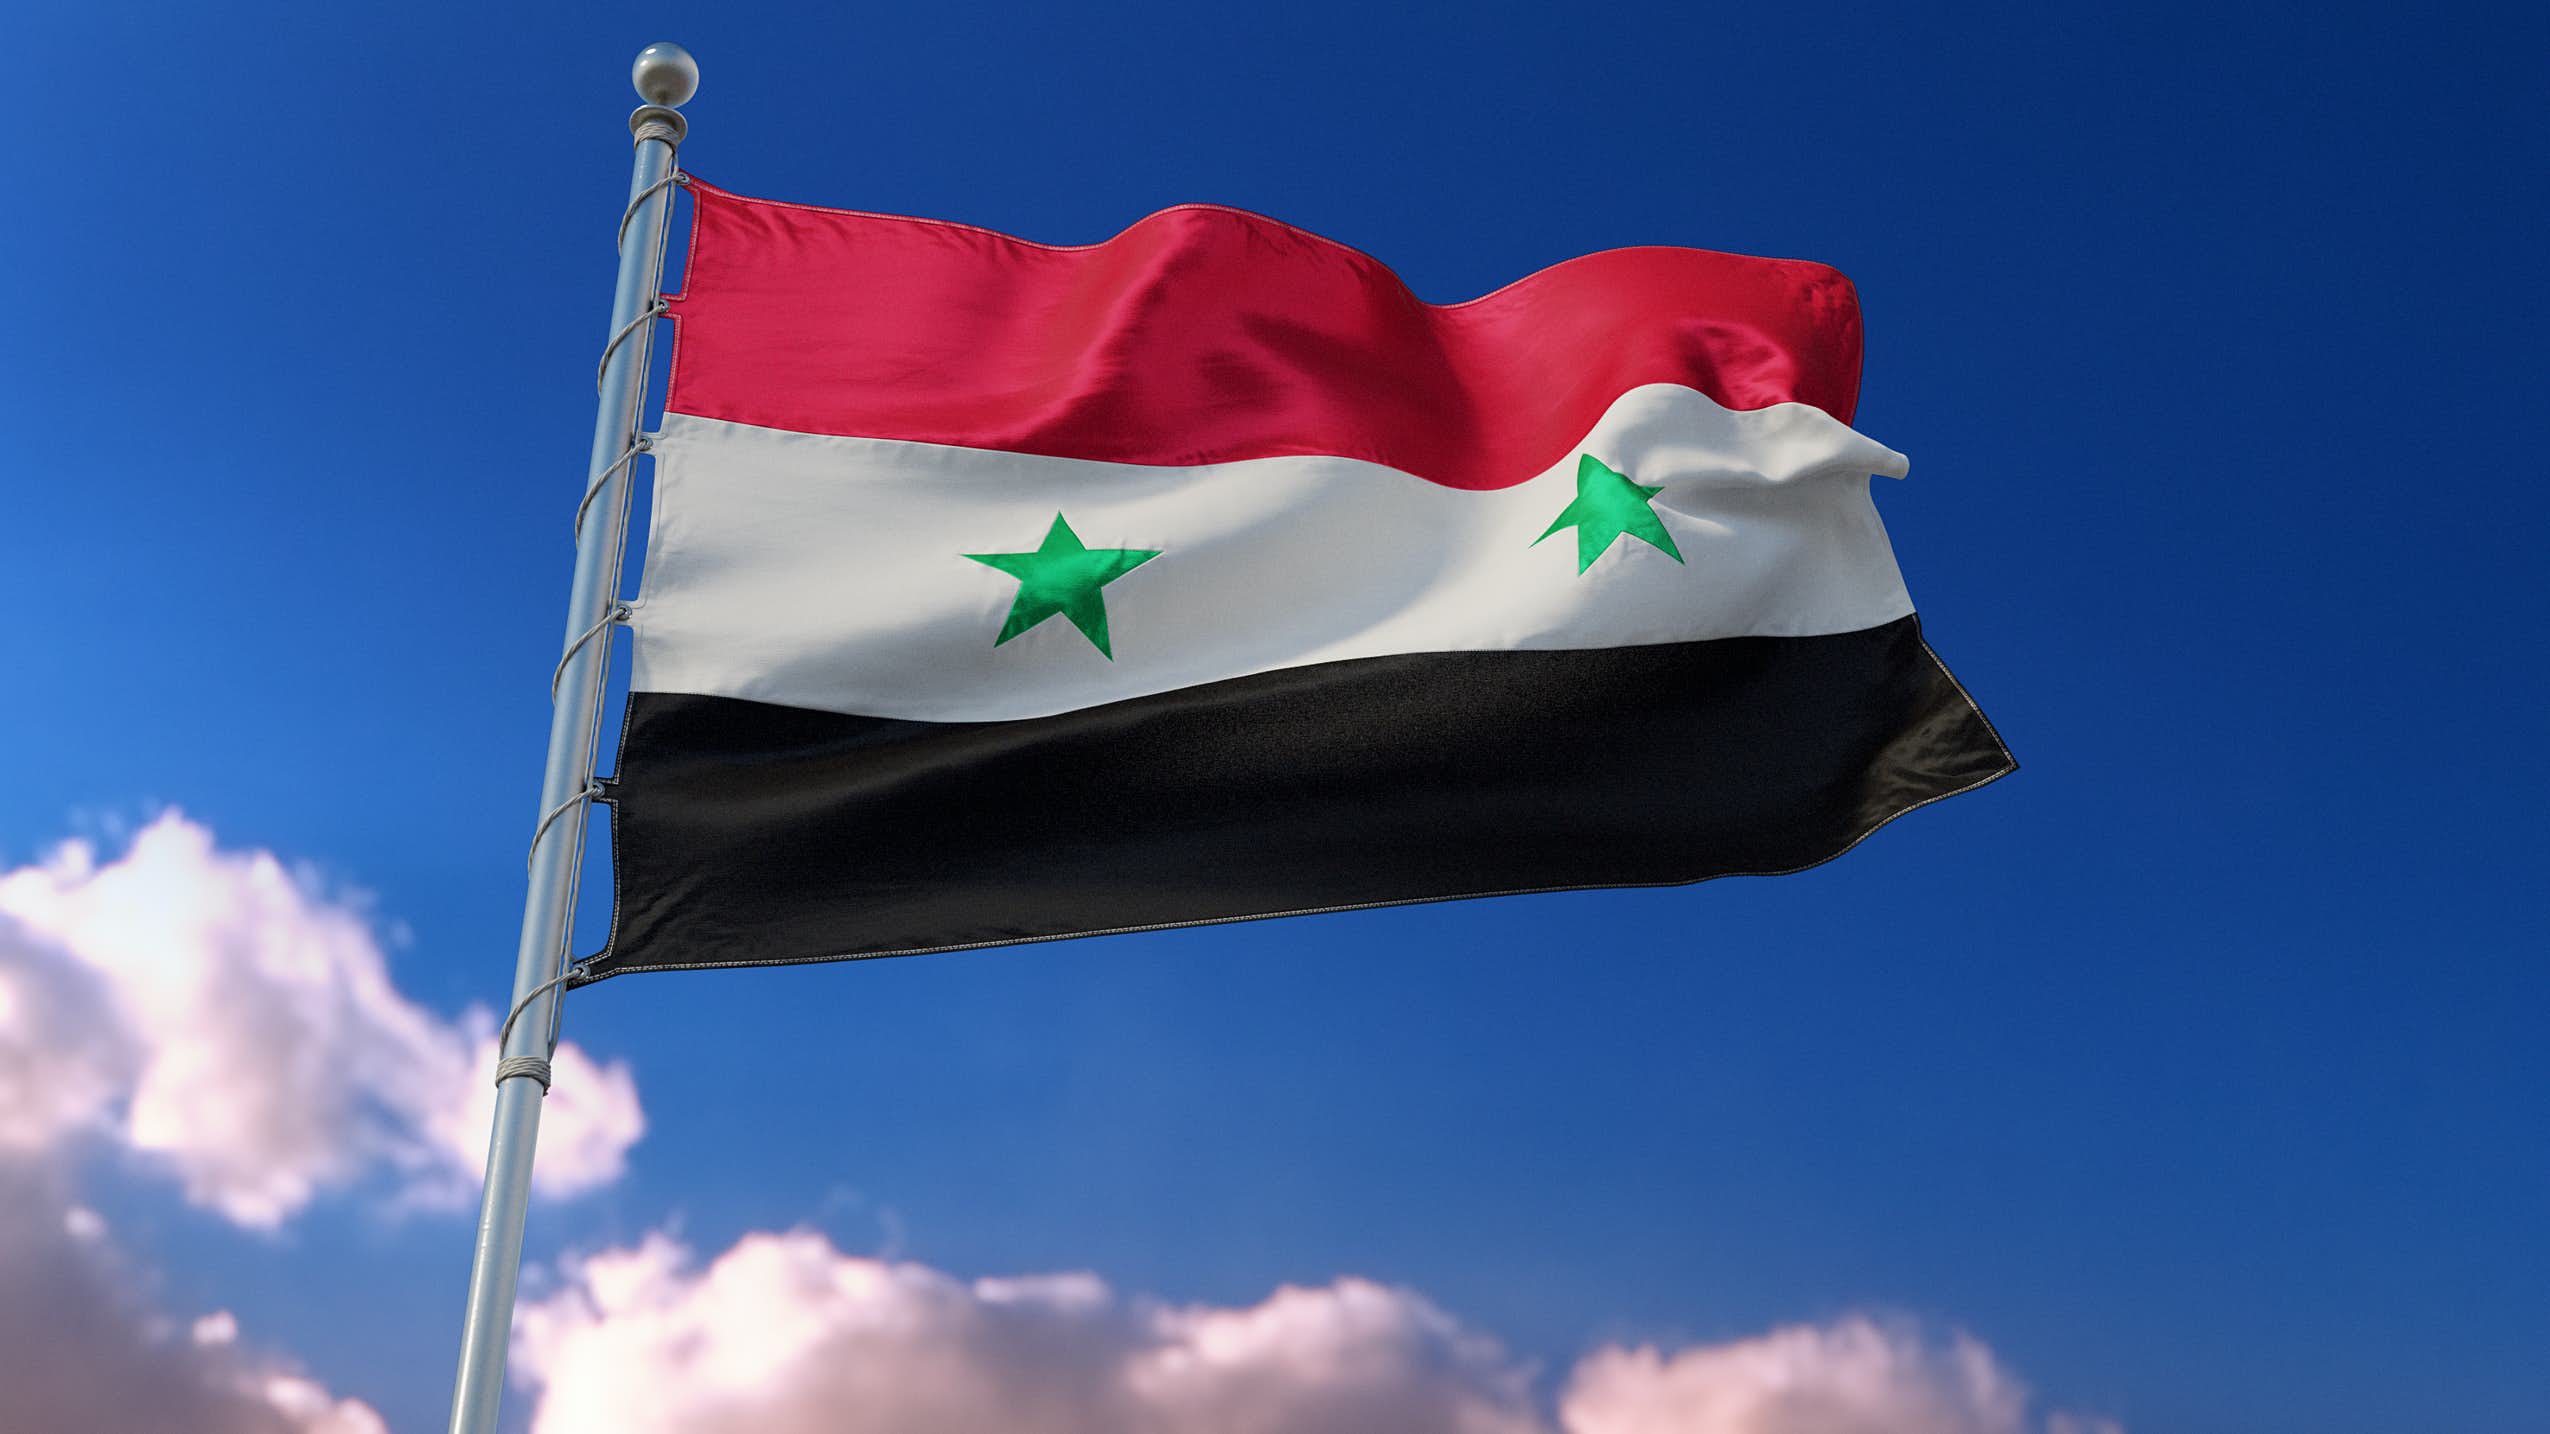 Syria celebrates 76th anniversary of its independence from French colonialism